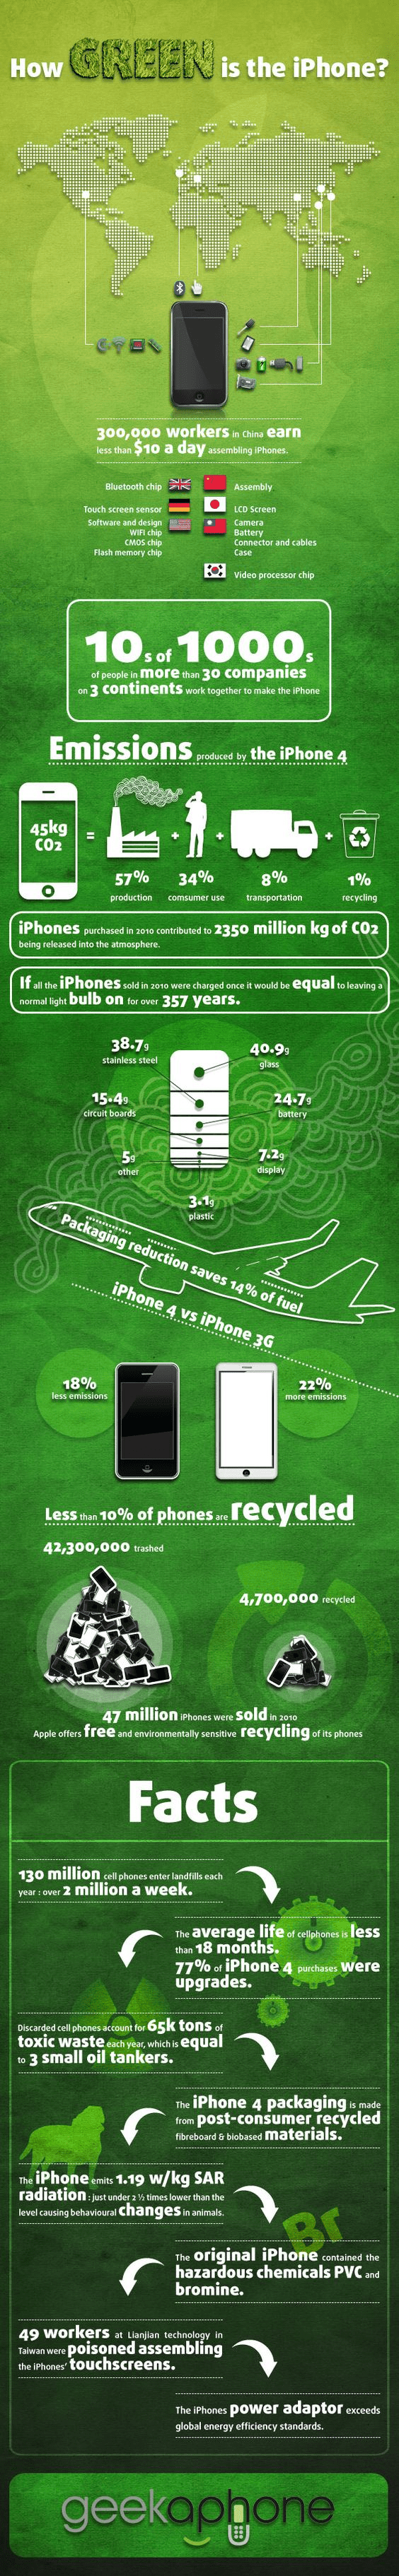 how green is iphone infographic